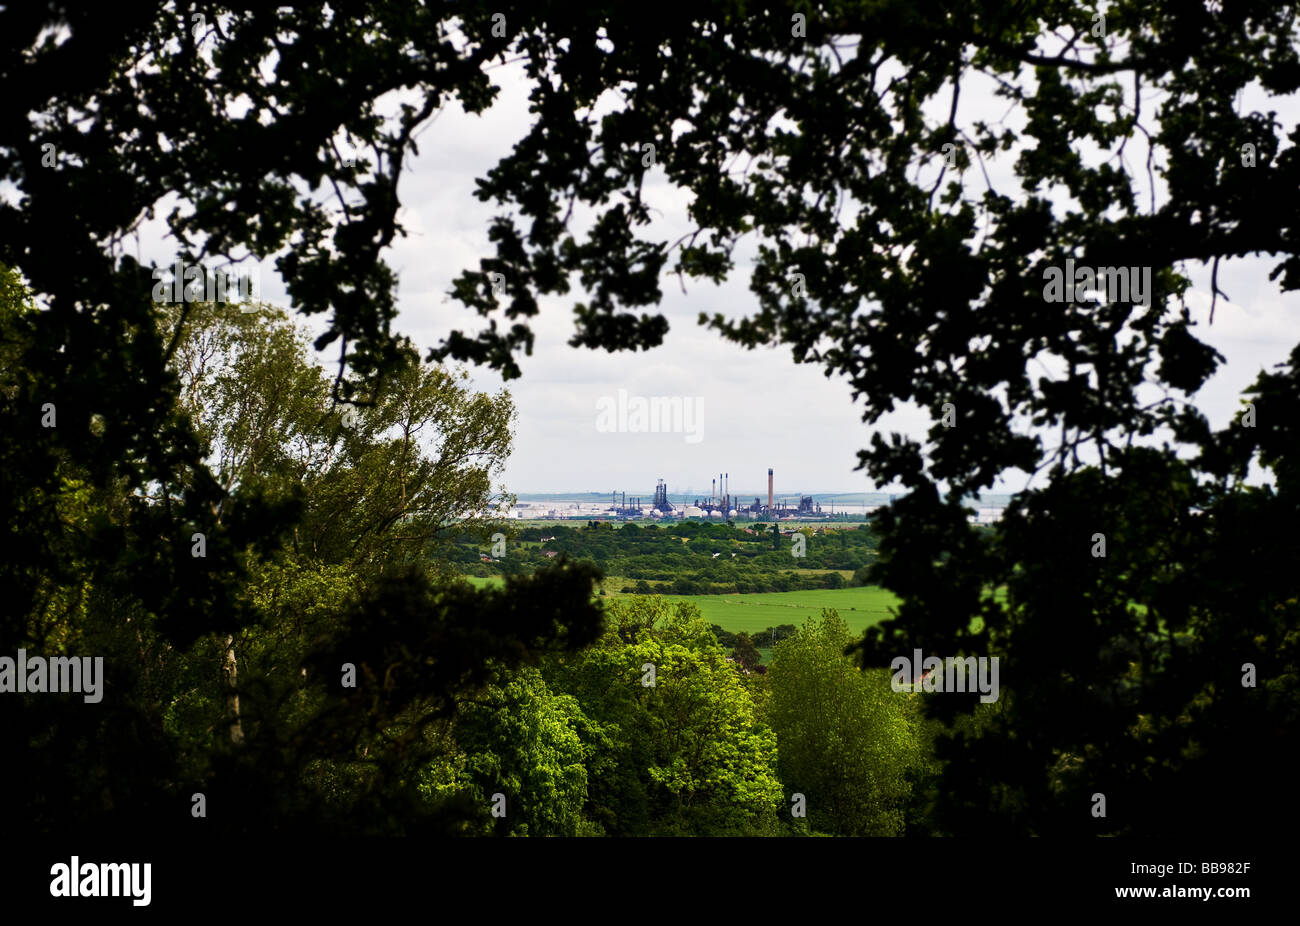 Coryton Oil Refinery seen through trees on One Tree Hill in Essex. Stock Photo